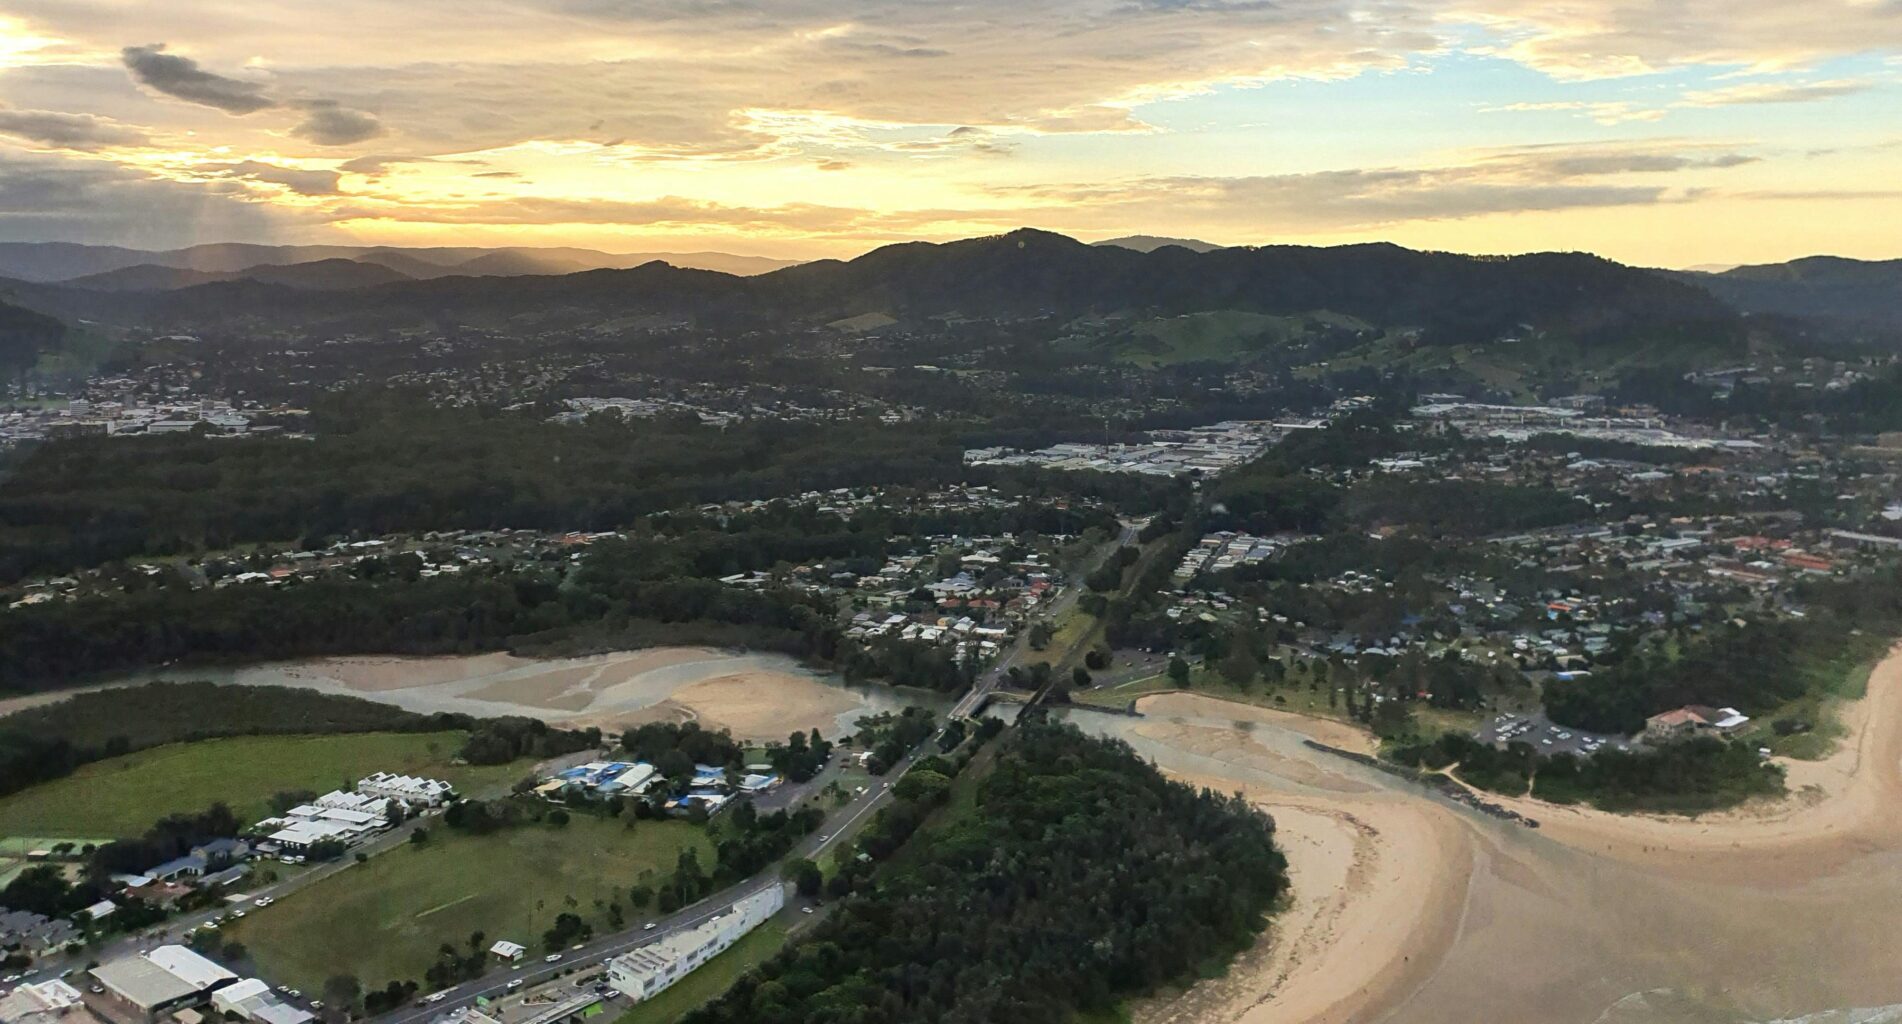 Sunset with ranges in the background overlooking Coffs Harbour, taken from a Helicopter